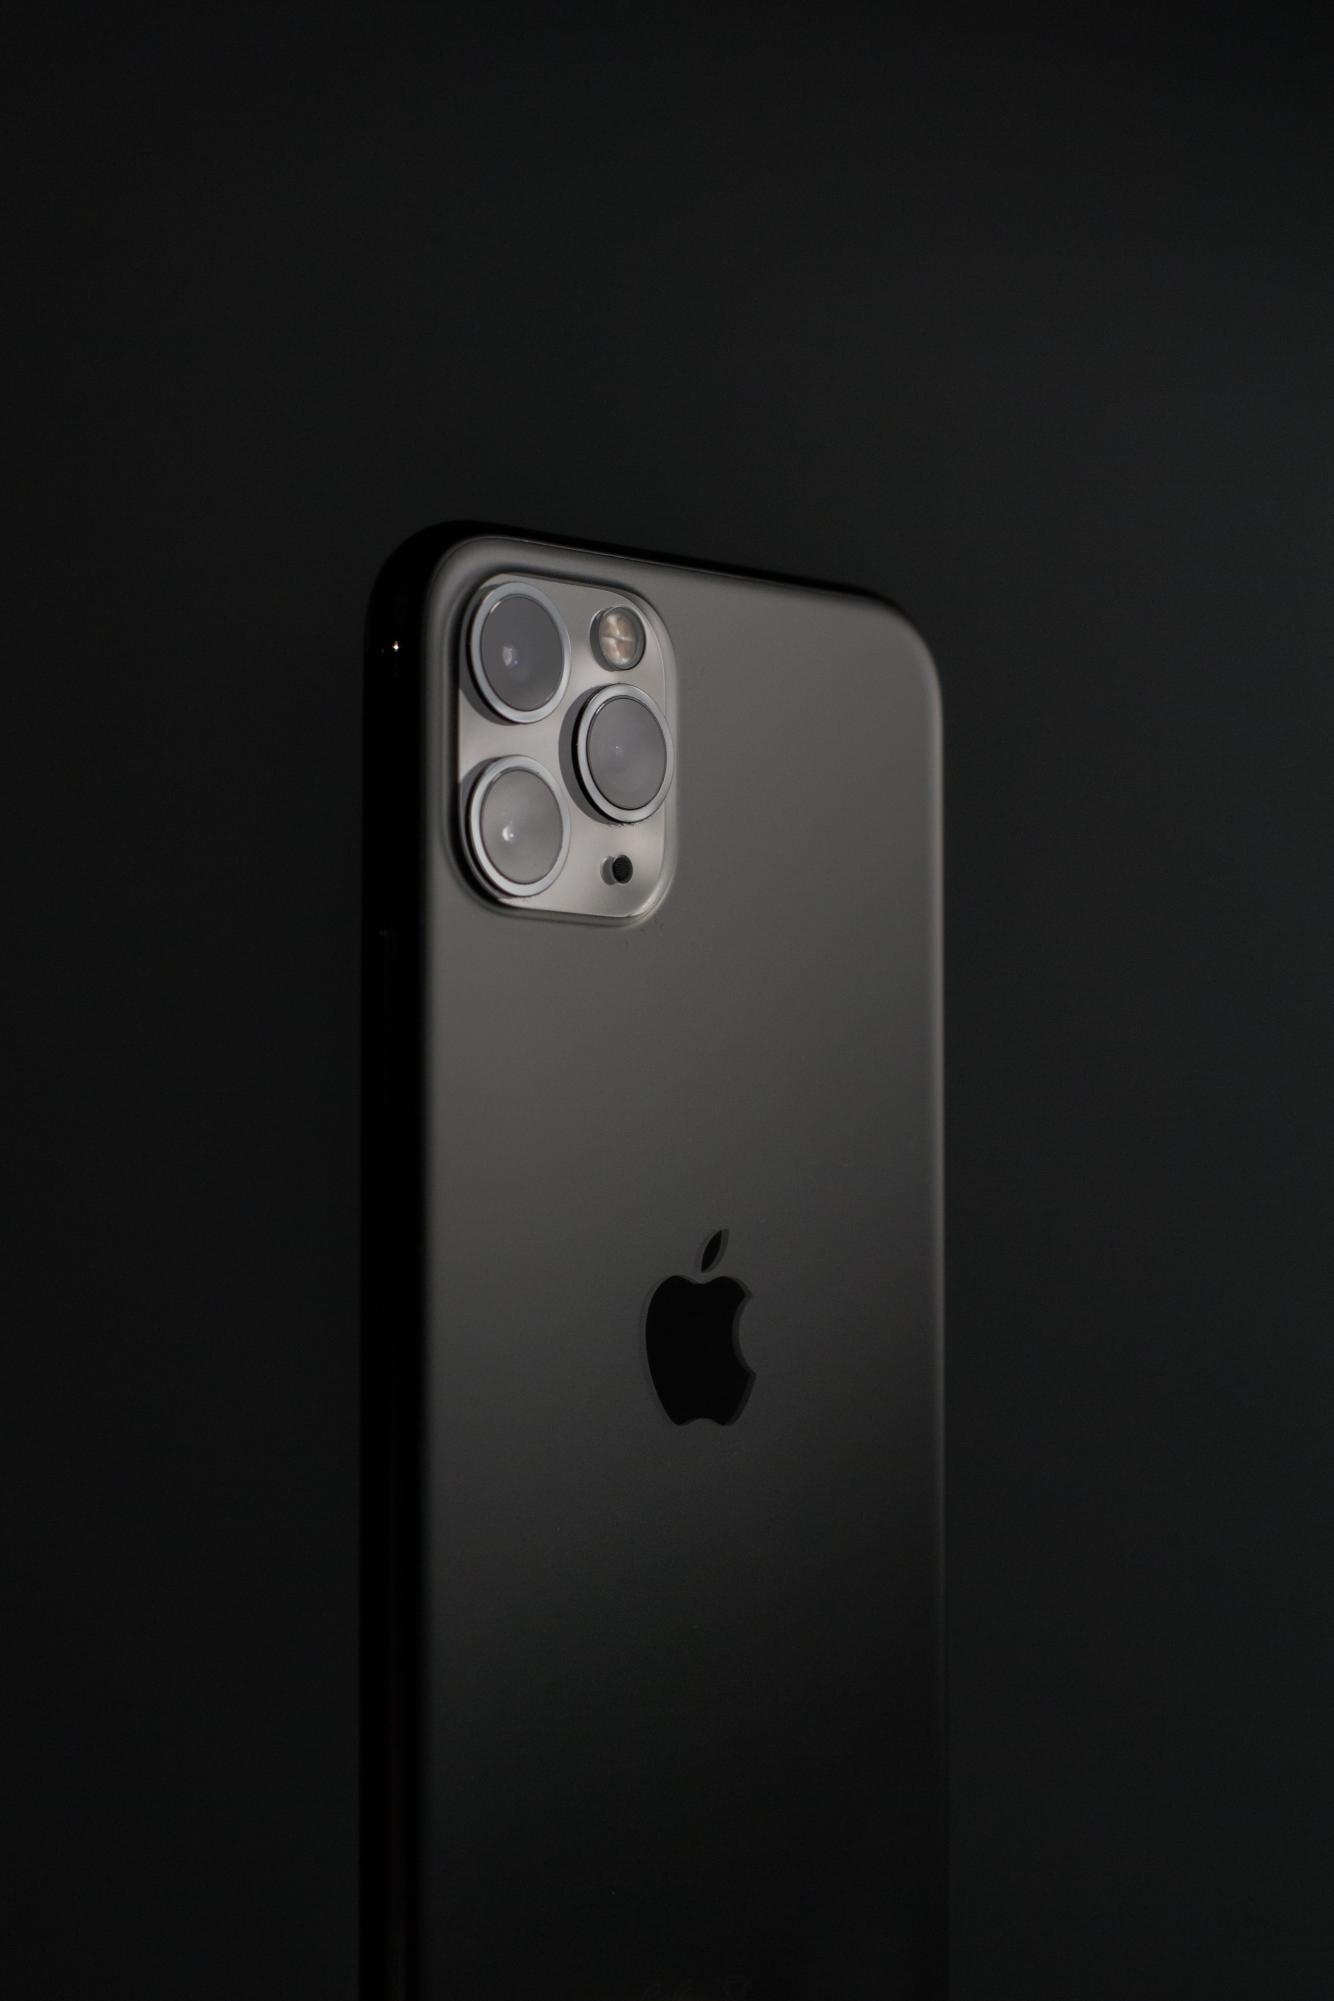 The iPhone 15 is the pinnacle of Apples ingenuity, but with each successive iteration, there is less and less of a distinguishable difference between each new handset. Its evident that Apples strategy extends beyond hardware innovation, but it also raises concerns about consumer choices as rivals often resort to imitation to cut costs.  
